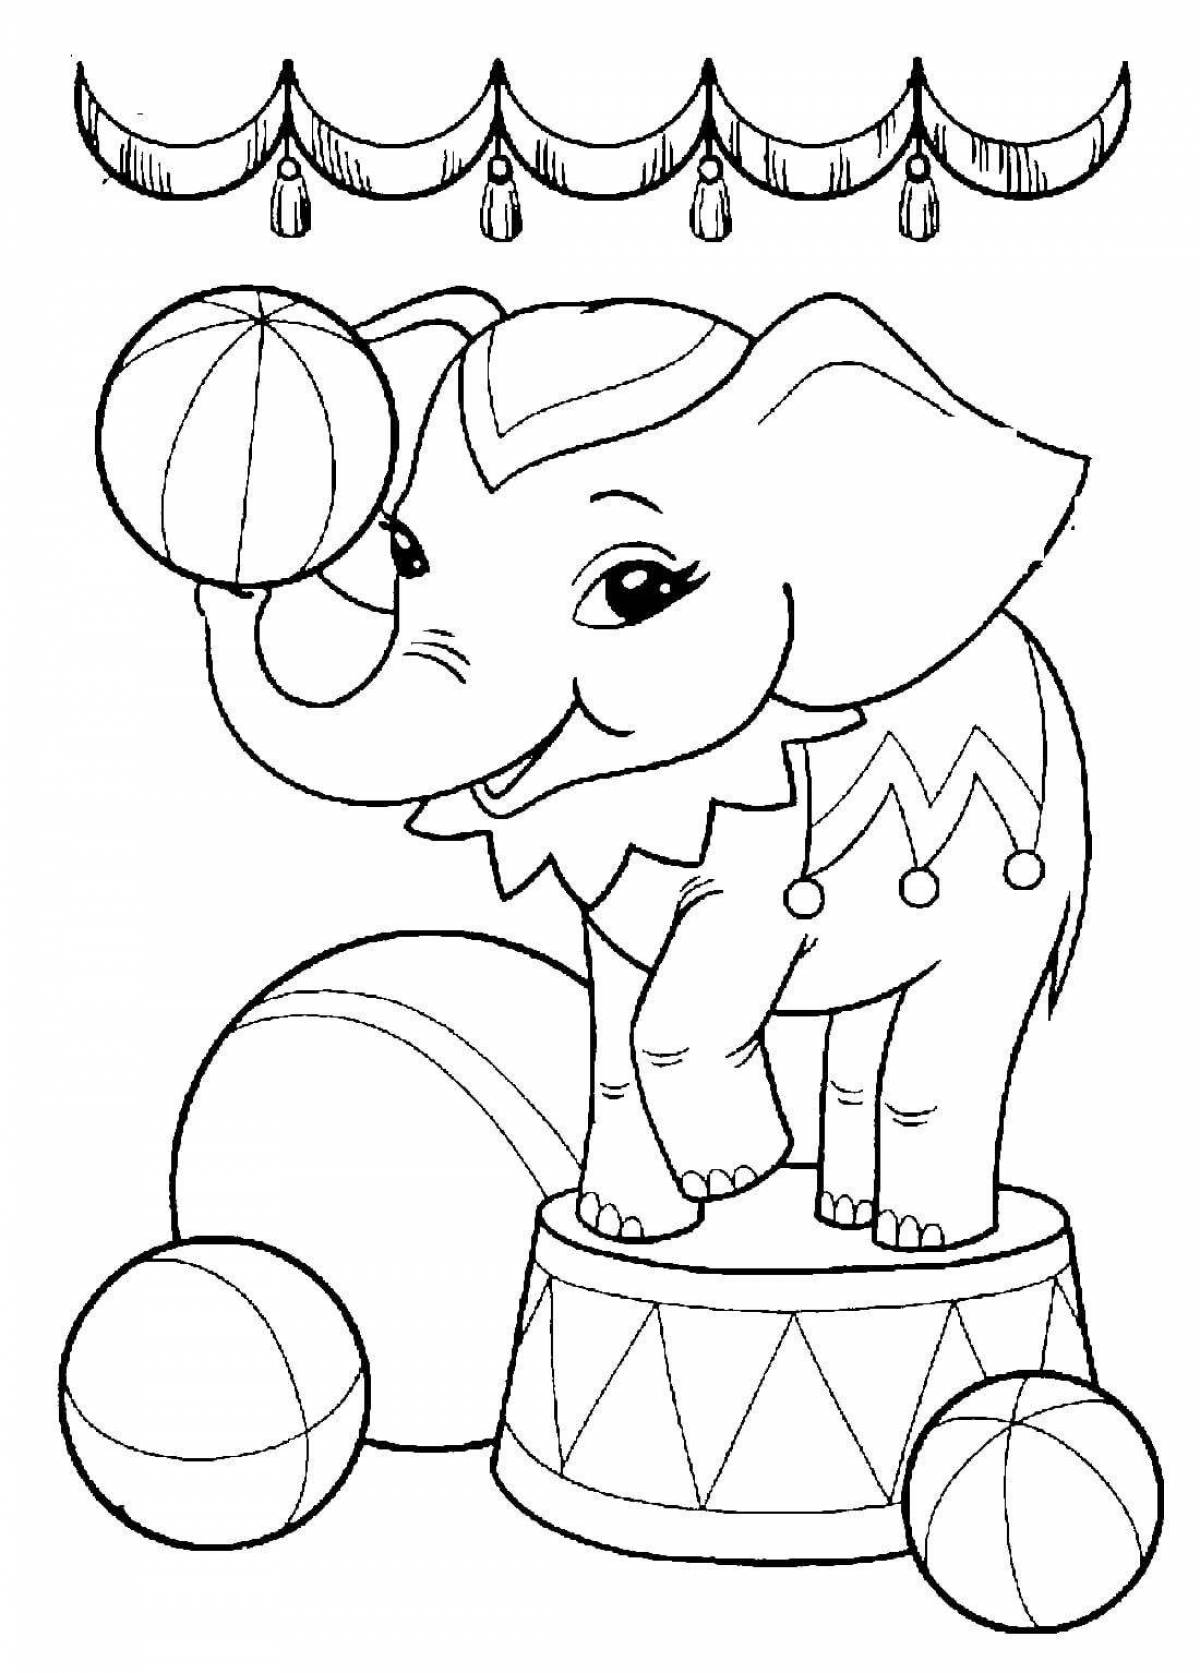 Ecstatic circus coloring book for kids